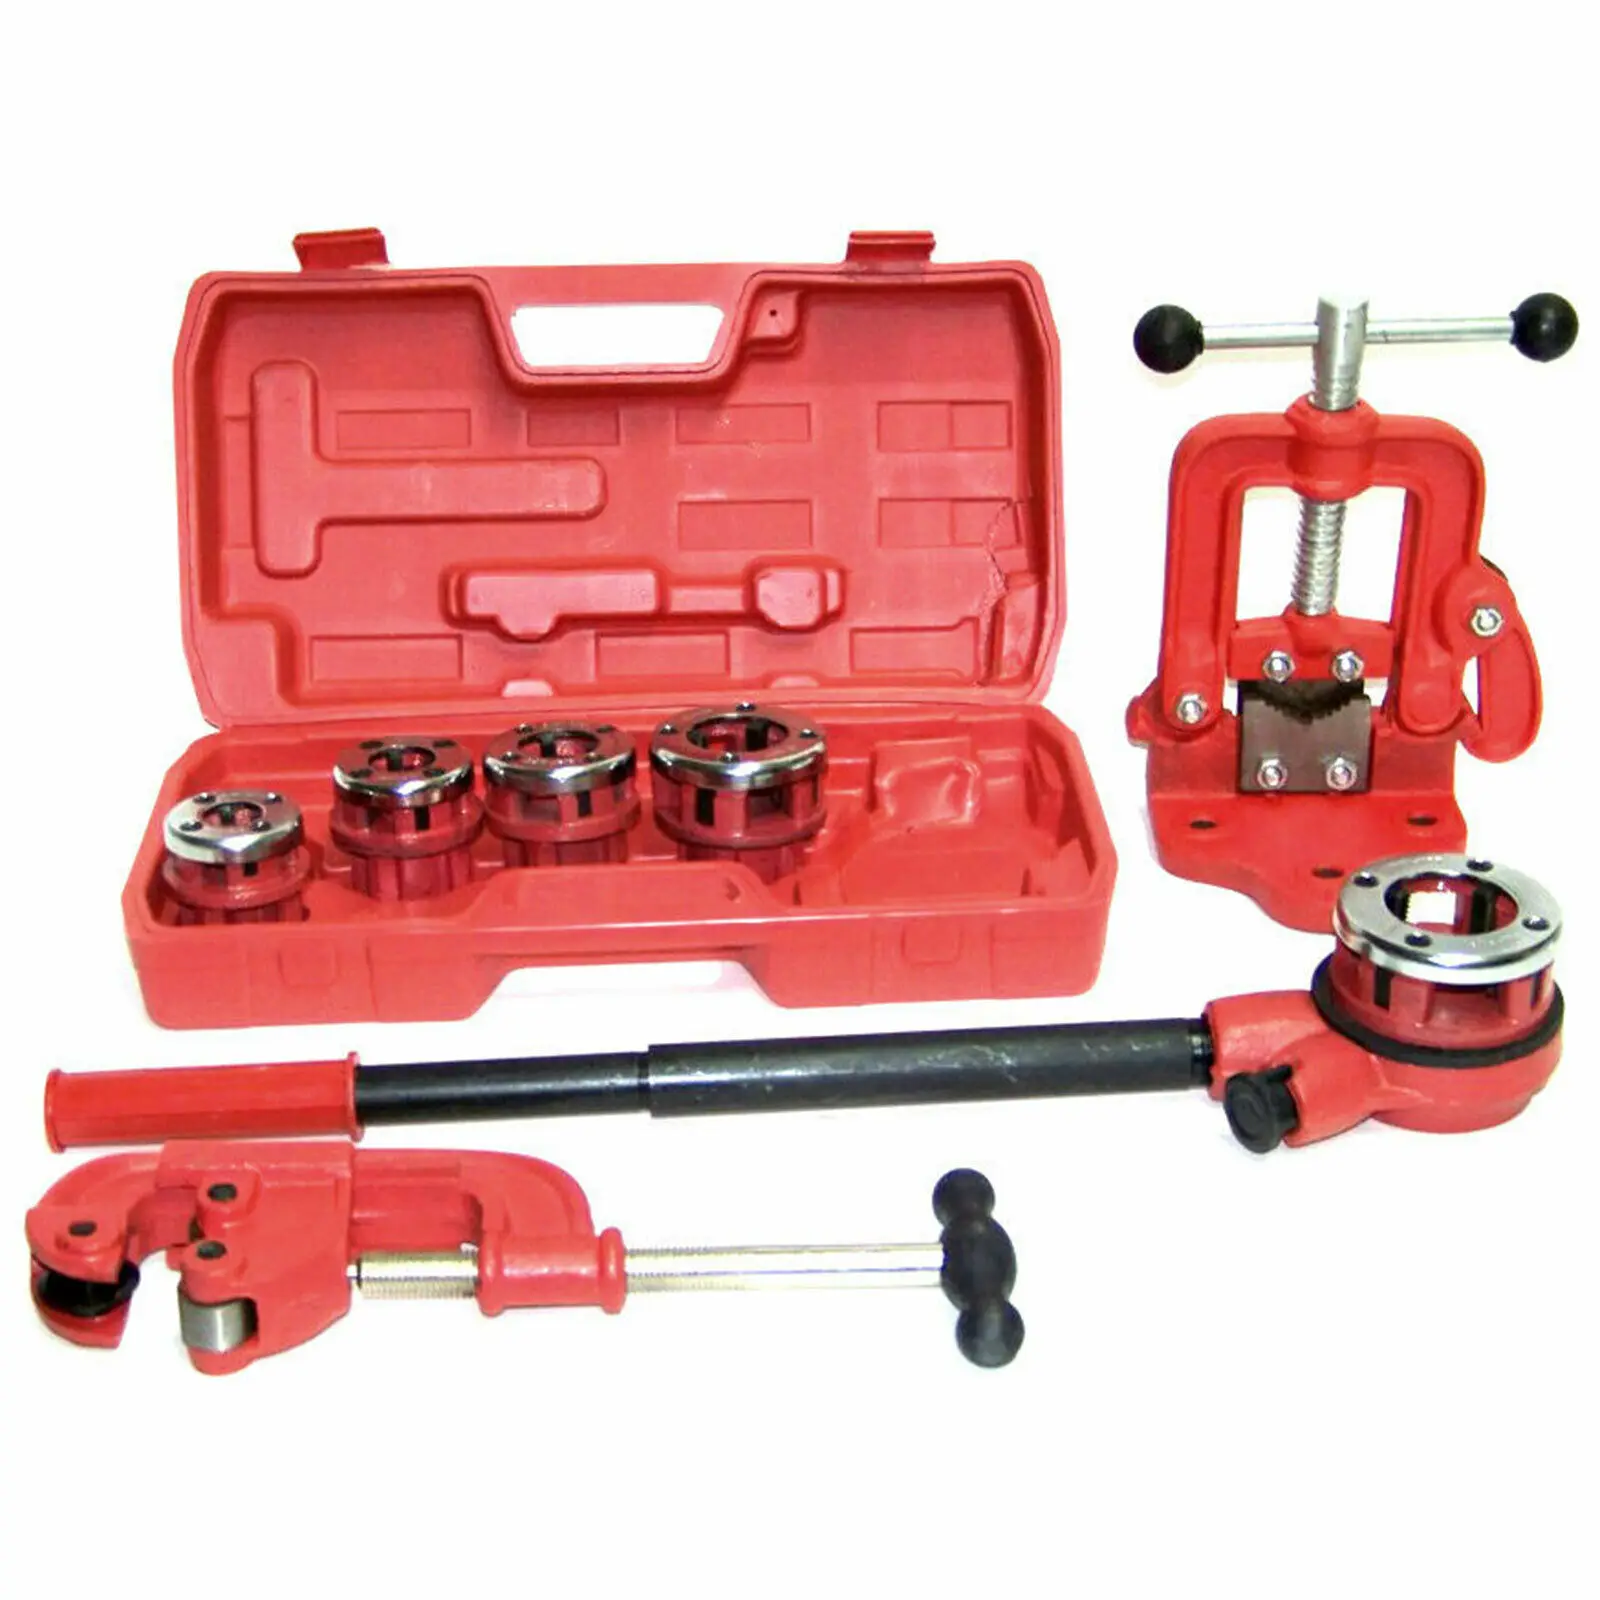 Ratchet Pipe Handheld Type Threader Kit for Cutting & Threading Of Pipes Red BSPT4